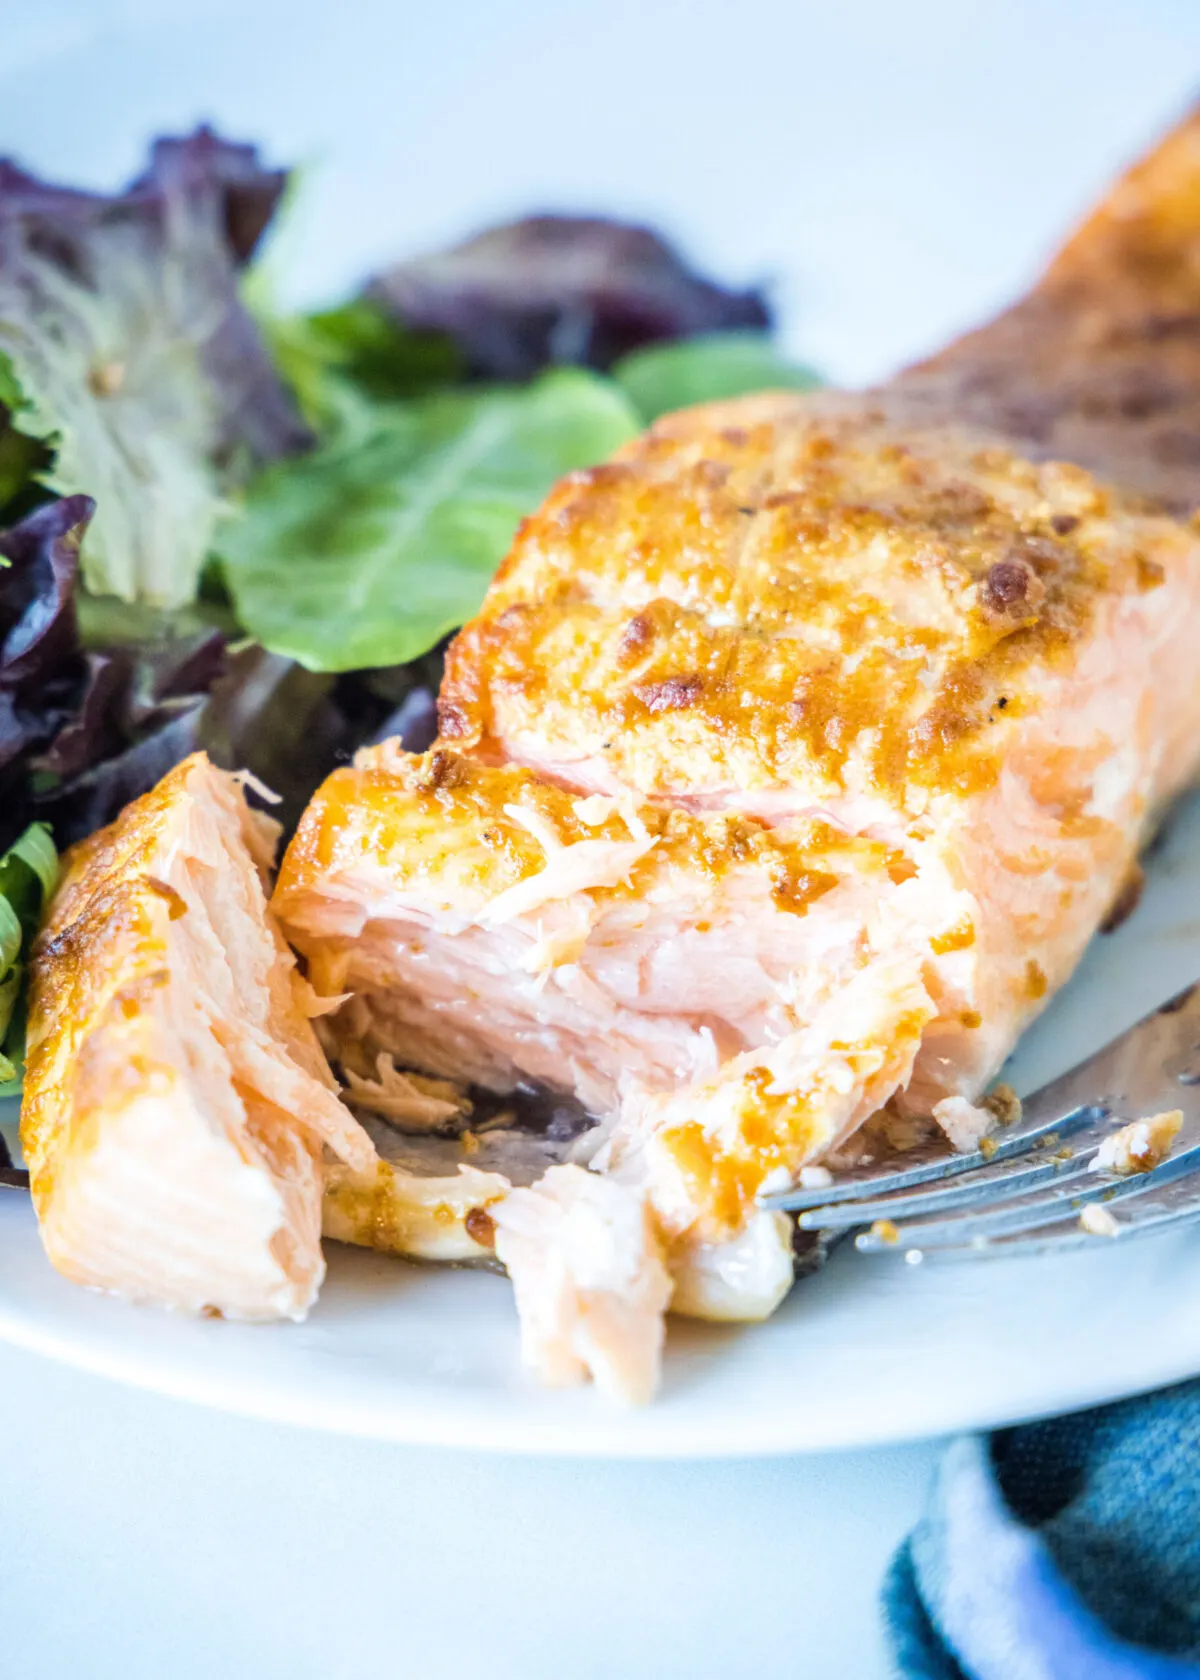 Close up of a fork cutting through a salmon fillet on a plate with a salad.